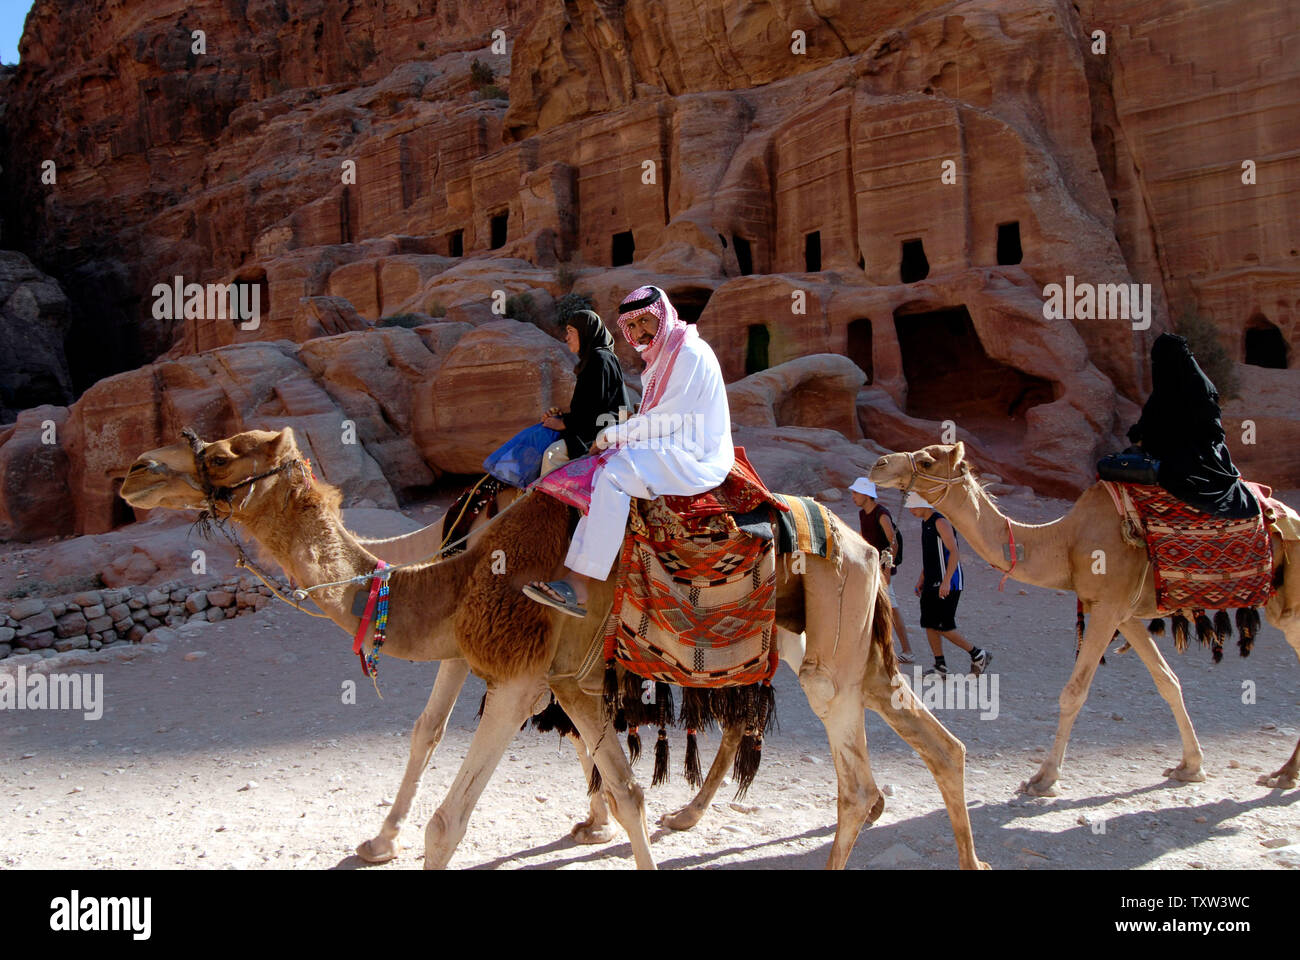 Arab tourists ride camels in Petra, Jordan, August 6, 2007. Petra is the  remains of a city carved out of the rock in southern Jordan by the  Nabataean Arabs. It was voted